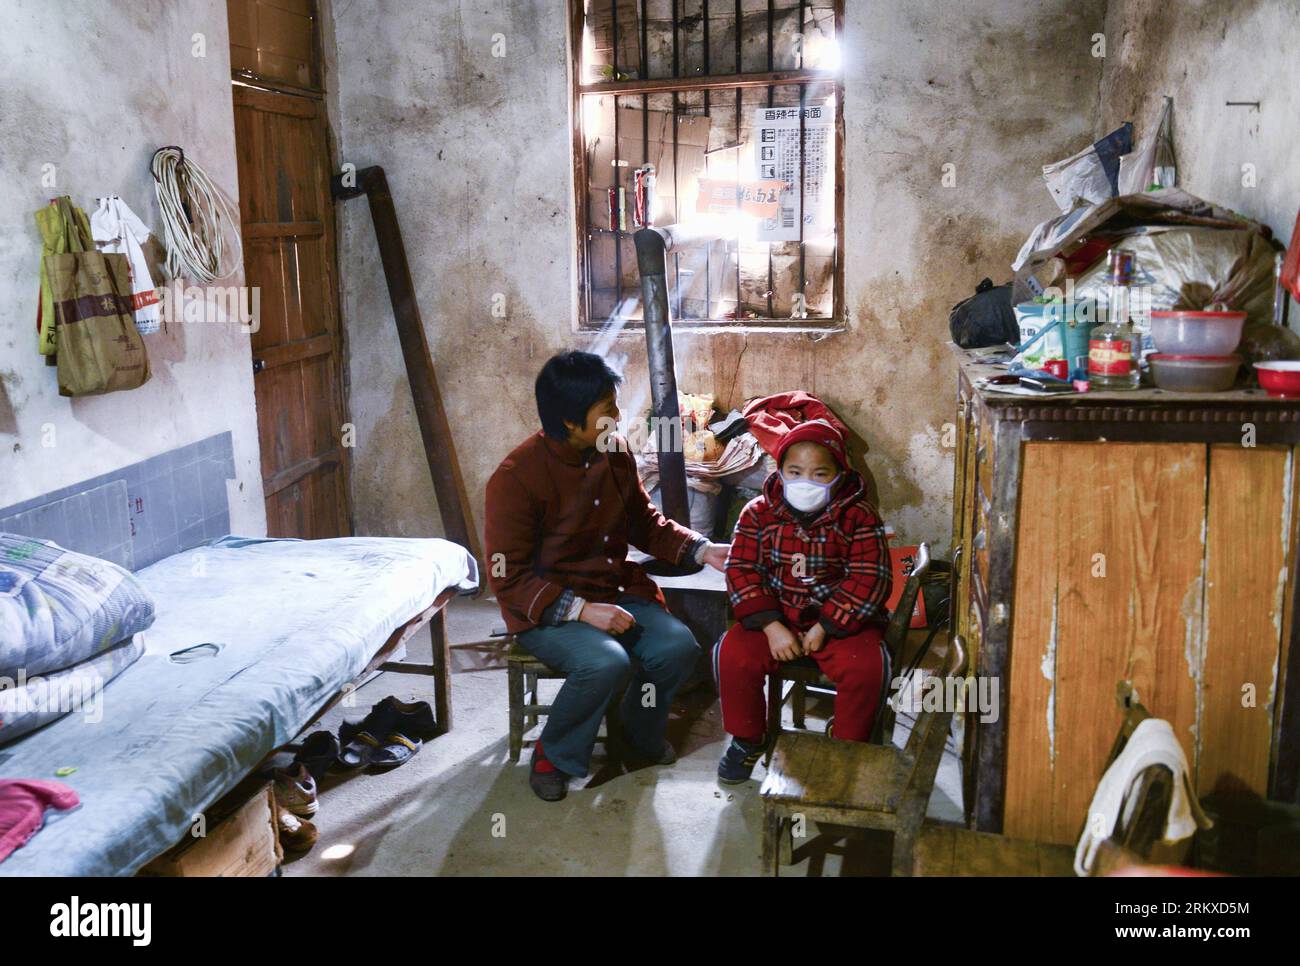 Bildnummer: 58948574  Datum: 19.12.2012  Copyright: imago/Xinhua A mother and her child Hu Ke, who is suffering from leukemia, are seen at home in Xingji Township of Xinyang City, central China s Henan Province, Dec. 19, 2012. Hu was diagnosed with leukemia in 2010, and has spent over 300,000 yuan (48,120 U.S. dollars) for medical treatment. (Xinhua/Jin Liangkuai) (ry) CHINA-HENAN-LEUKEMIA-CHILDREN (CN) PUBLICATIONxNOTxINxCHN Gesellschaft krank Krankheit Leukämie Armut Kind x0x xrj 2012 quer     58948574 Date 19 12 2012 Copyright Imago XINHUA a Mother and her Child HU Ke Who IS Suffering from Stock Photo